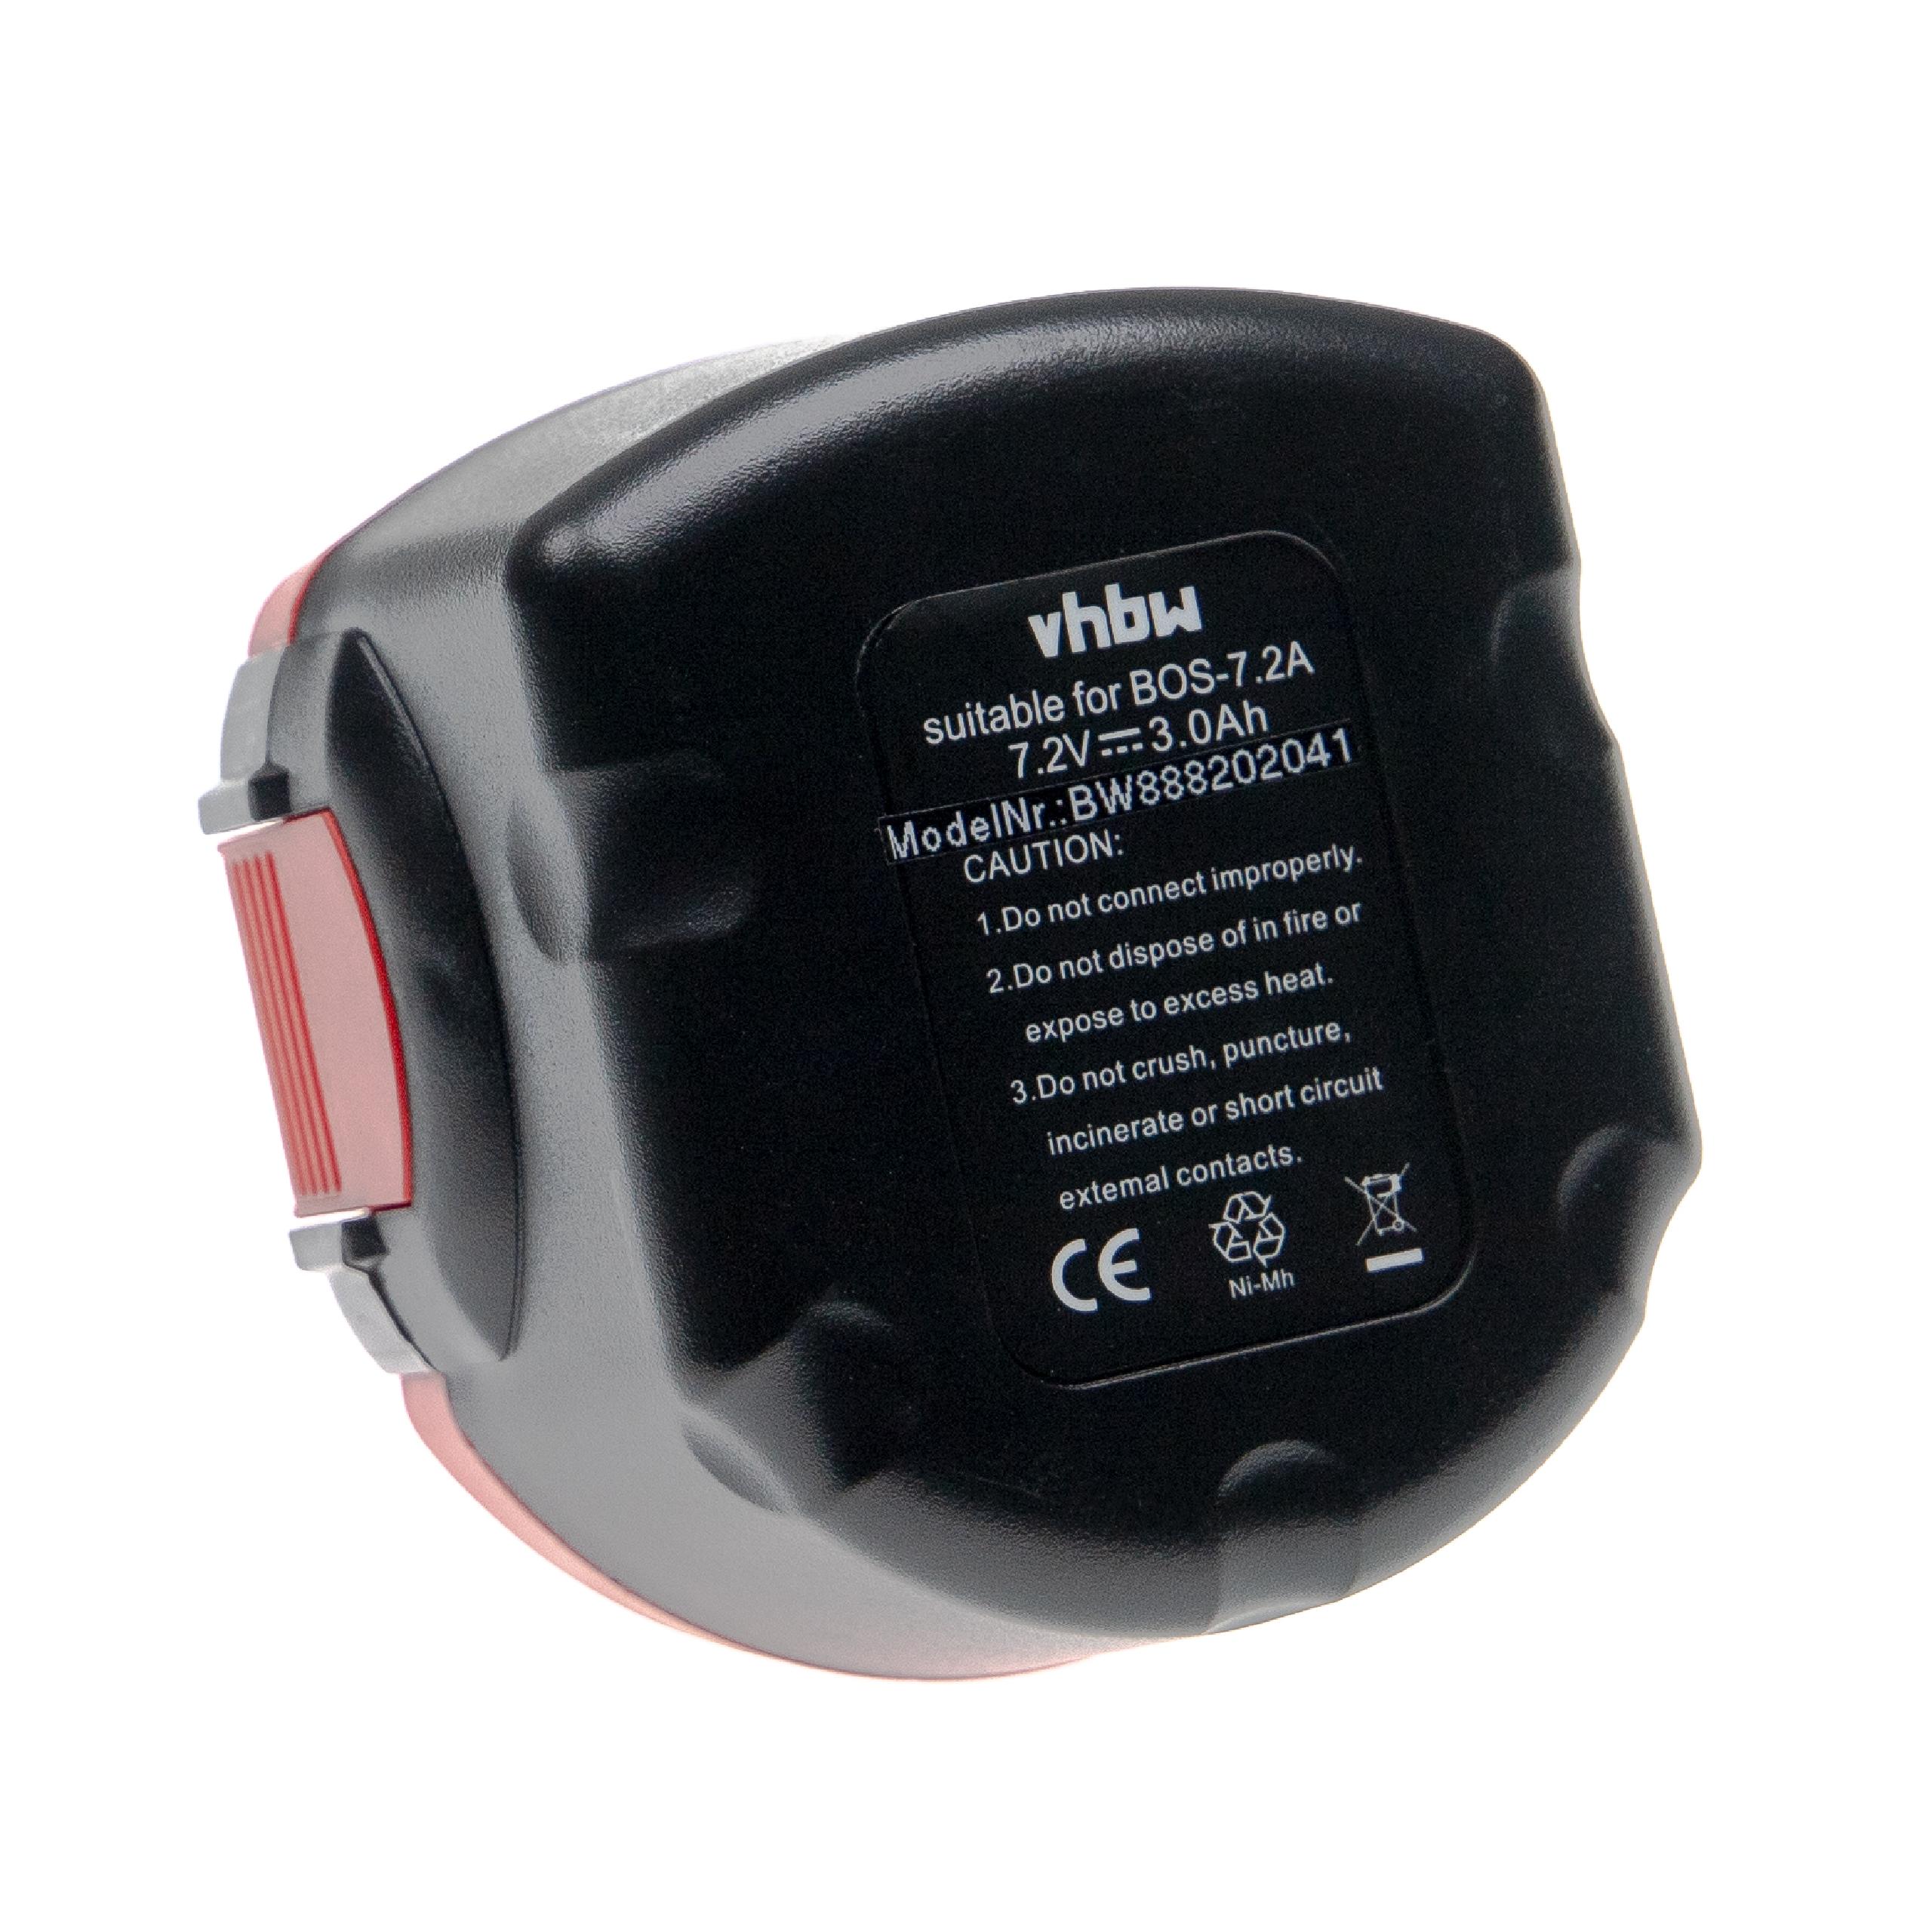 Electric Power Tool Battery Replaces Bosch 2 607 335 437, 2607335587, 2607335437 - 3000 mAh, 7.2 V, NiMH